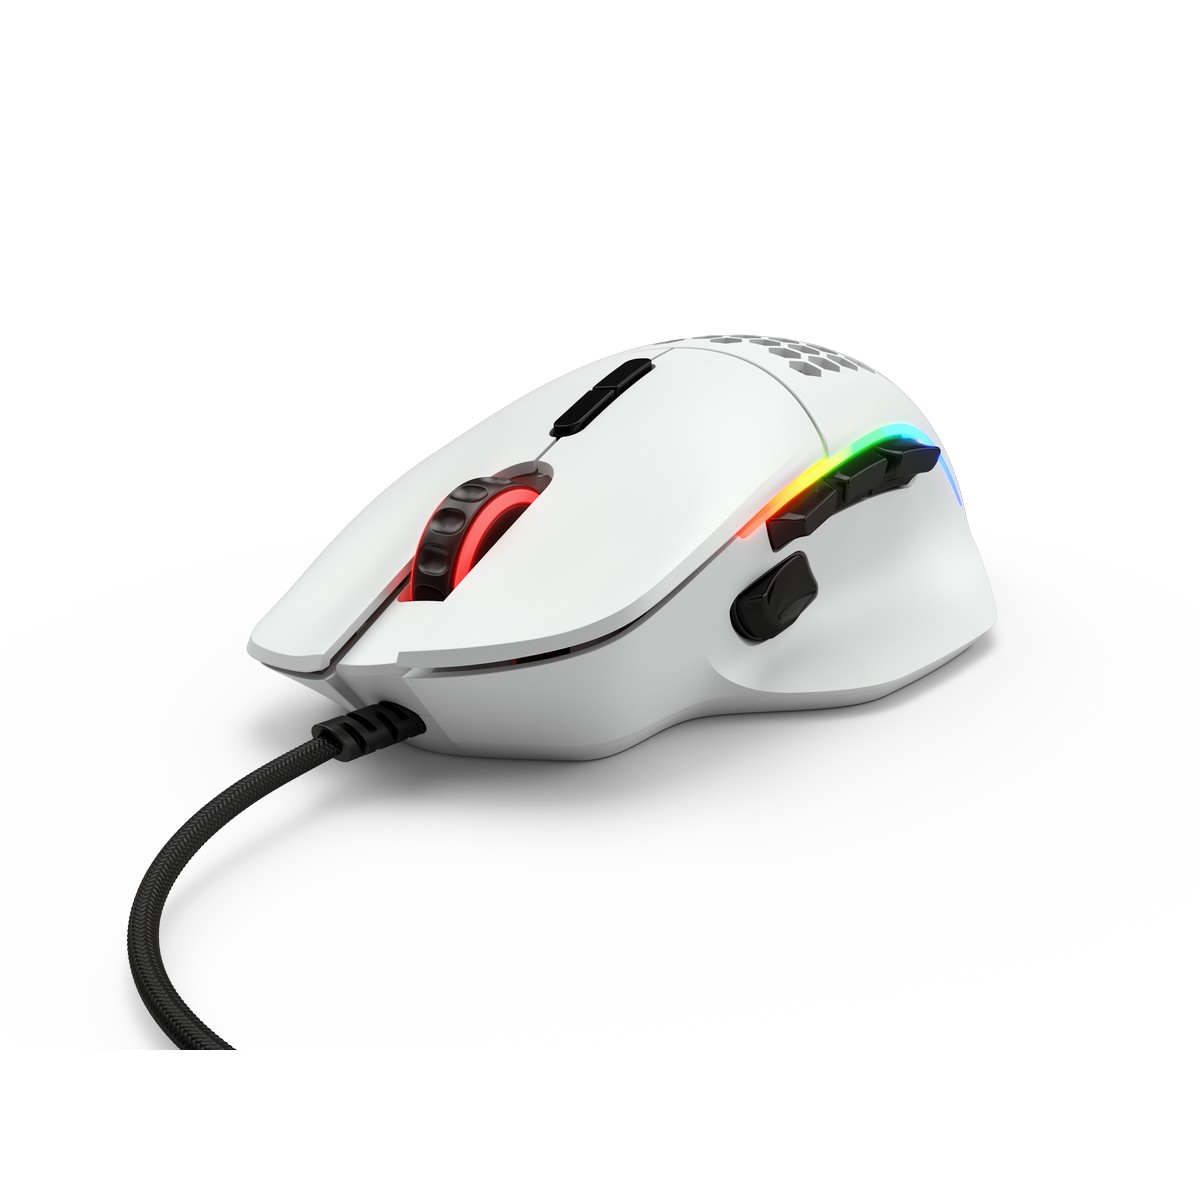 Glorious - B Grade Glorious Model I USB RGB Lightweight Gaming Mouse - Matte White (GLO-MS-I-MB)